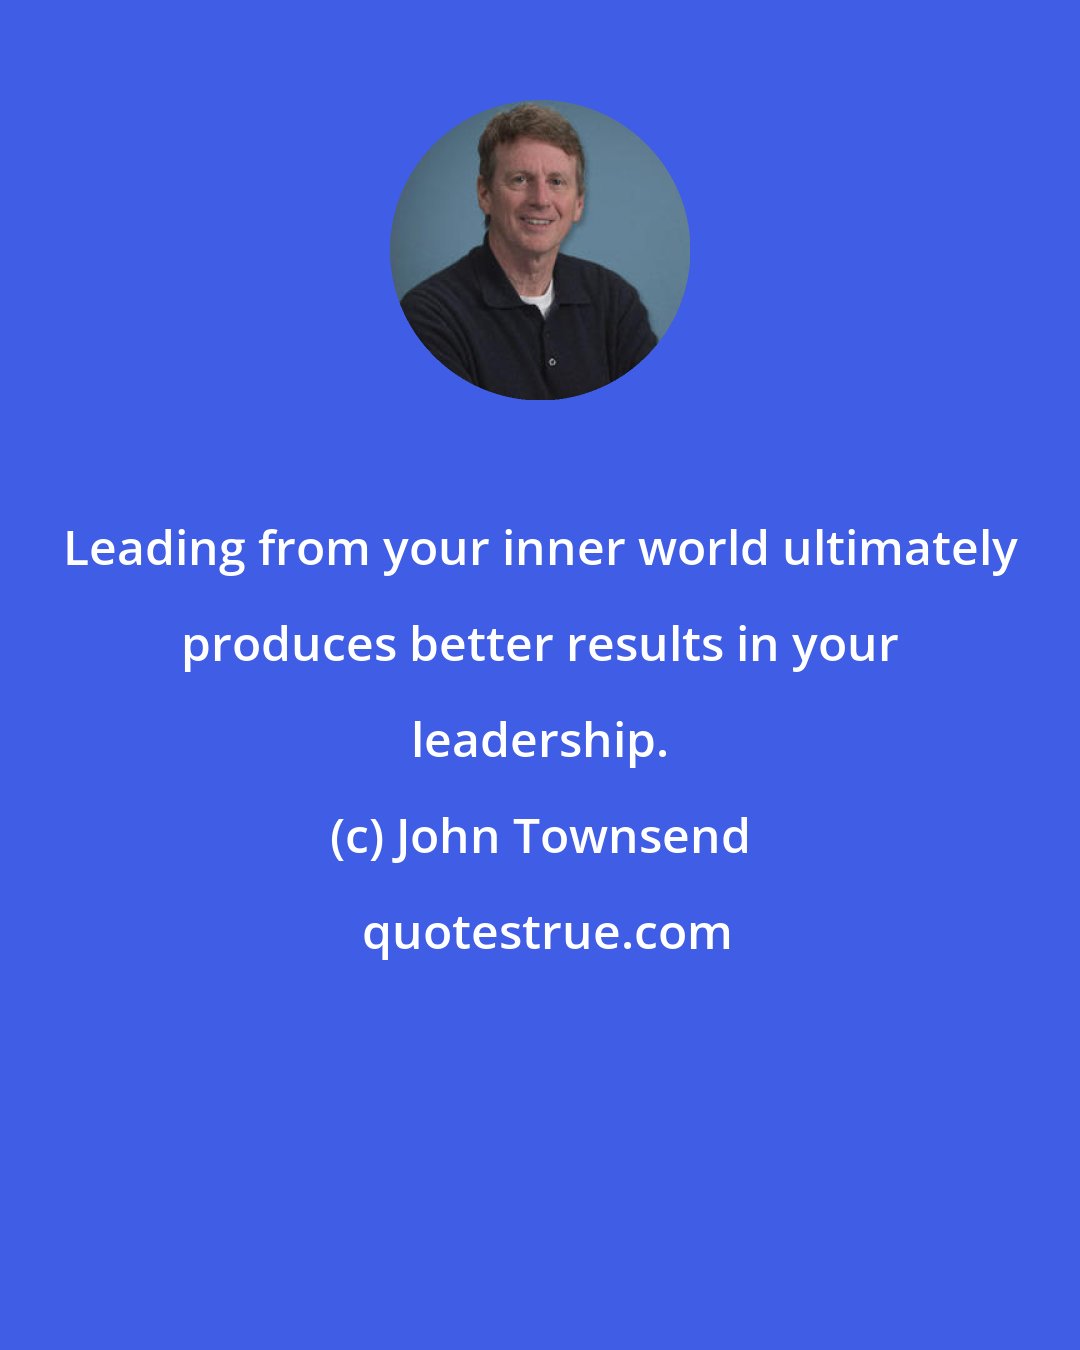 John Townsend: Leading from your inner world ultimately produces better results in your leadership.